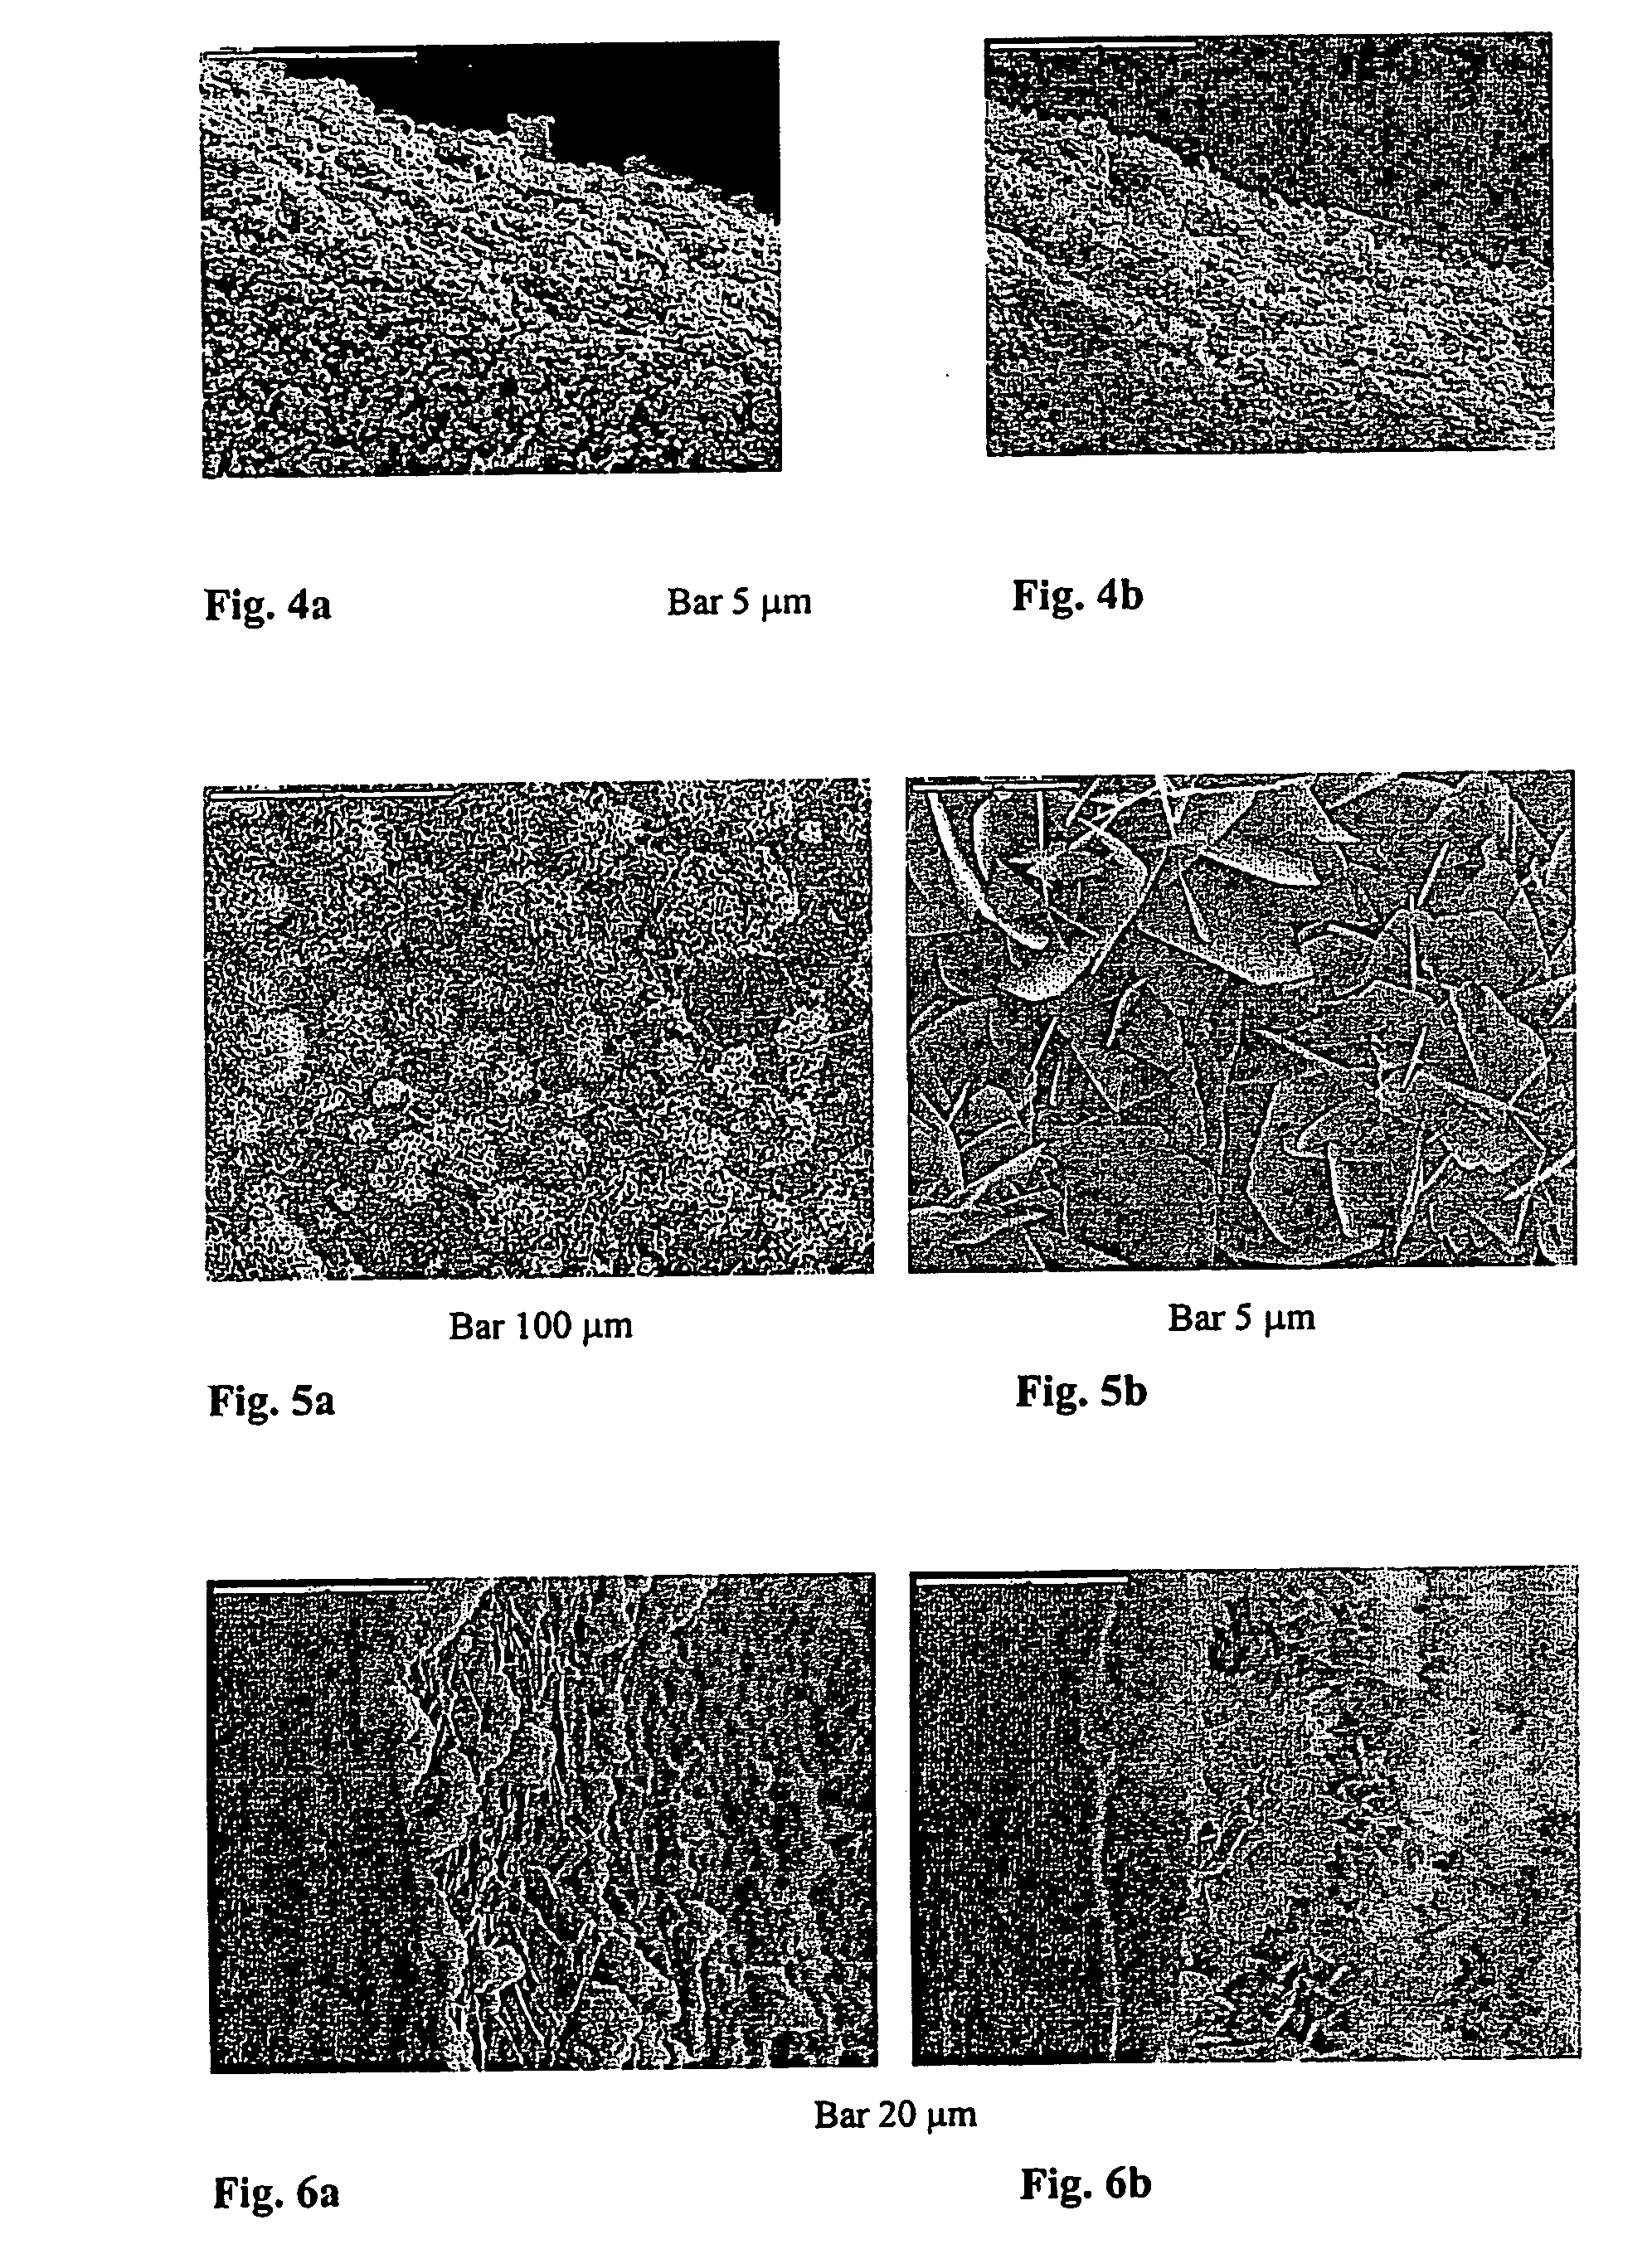 Organic-inorganic nanocomposite coatings for implant materials and methods of preparation thereof